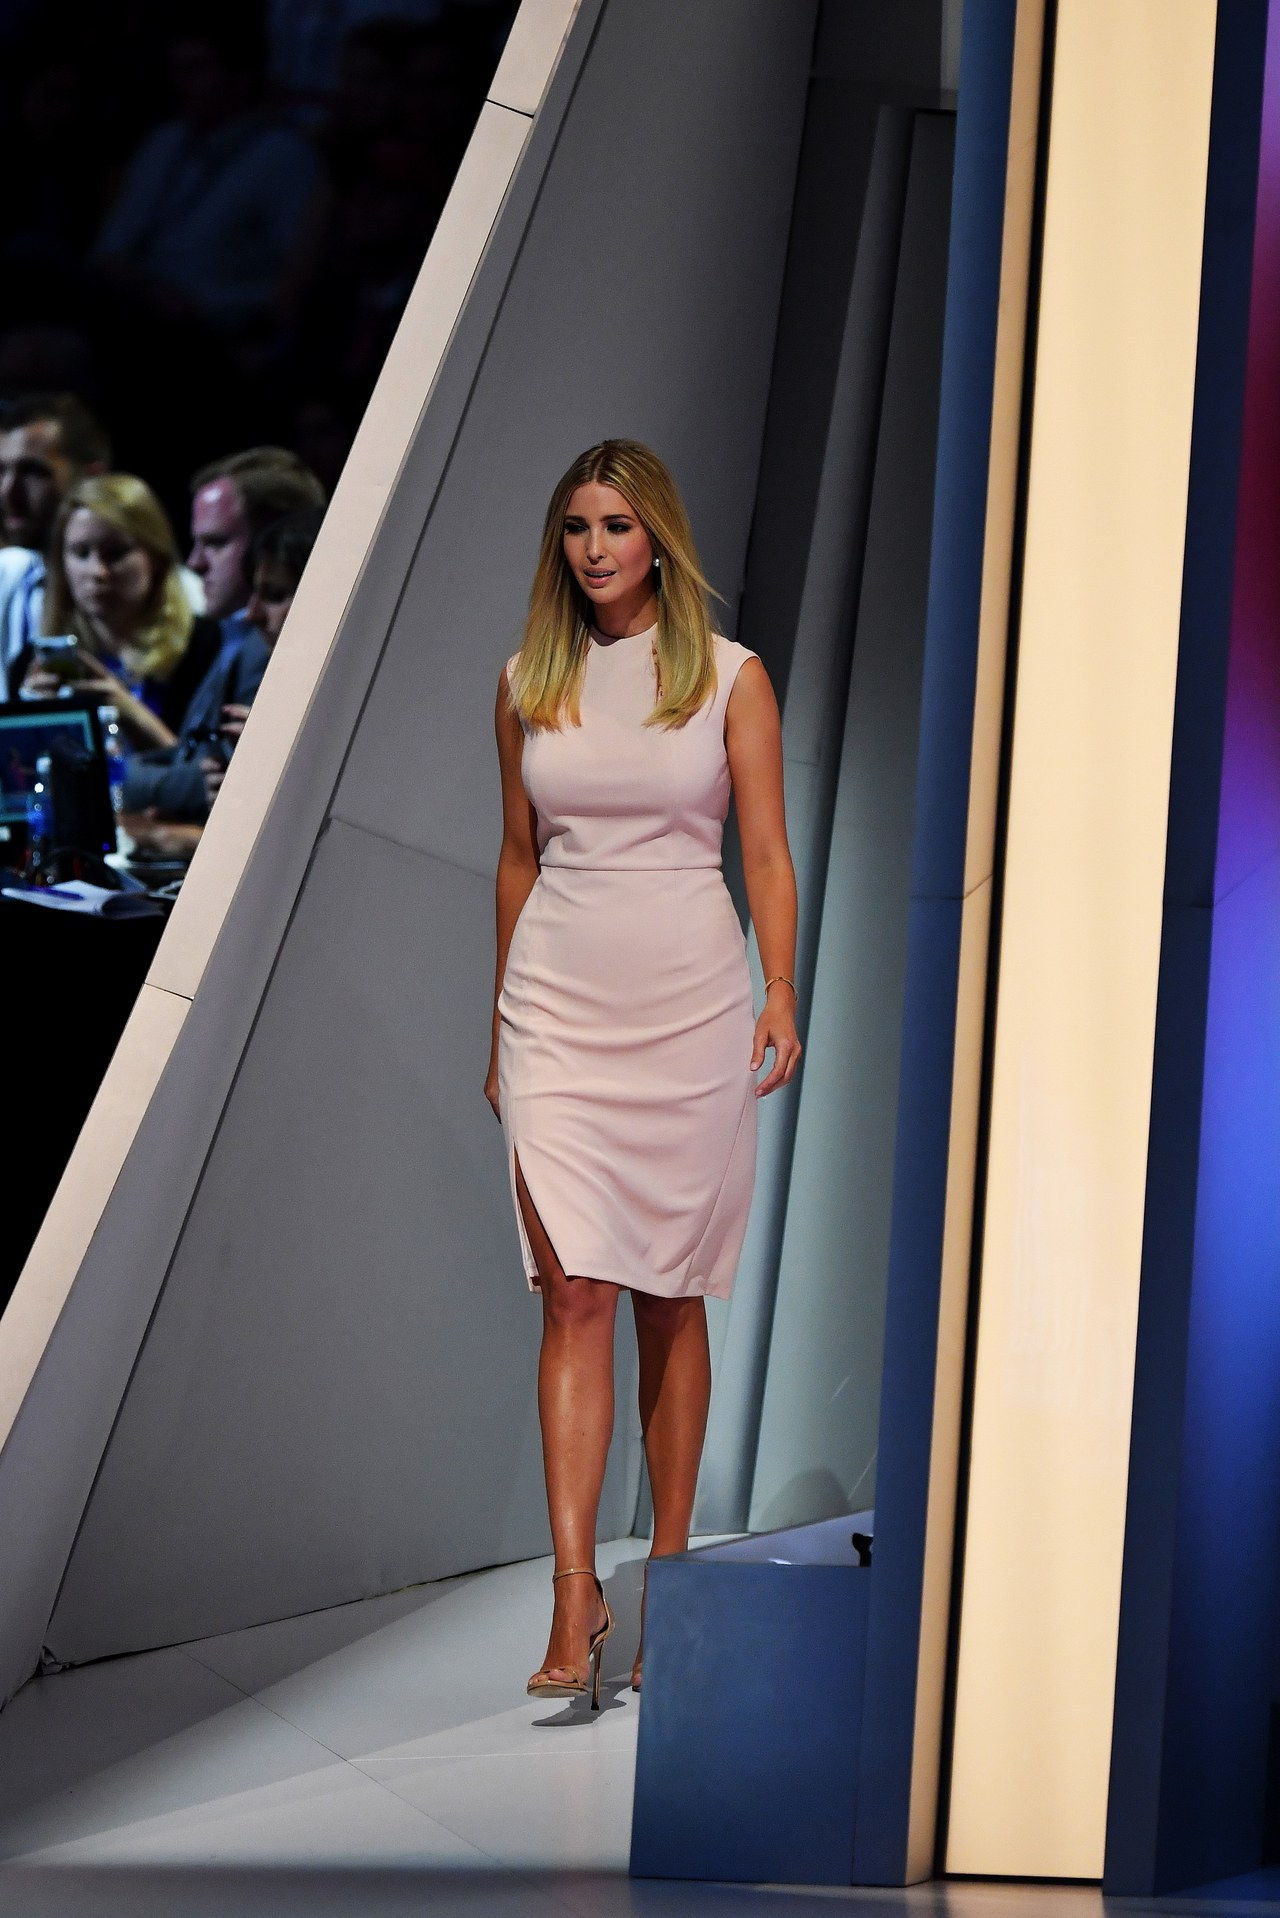 CLEVELAND, OH - JULY 21: Ivanka Trump walks on stage to deliver a speech during the evening session on the fourth day of the Republican National Convention on July 21, 2016 at the Quicken Loans Arena in Cleveland, Ohio. Republican presidential candidate Donald Trump received the number of votes needed to secure the party's nomination. An estimated 50,000 people are expected in Cleveland, including hundreds of protesters and members of the media. The four-day Republican National Convention kicked off on July 18. (Photo by Jeff J Mitchell/Getty Images)